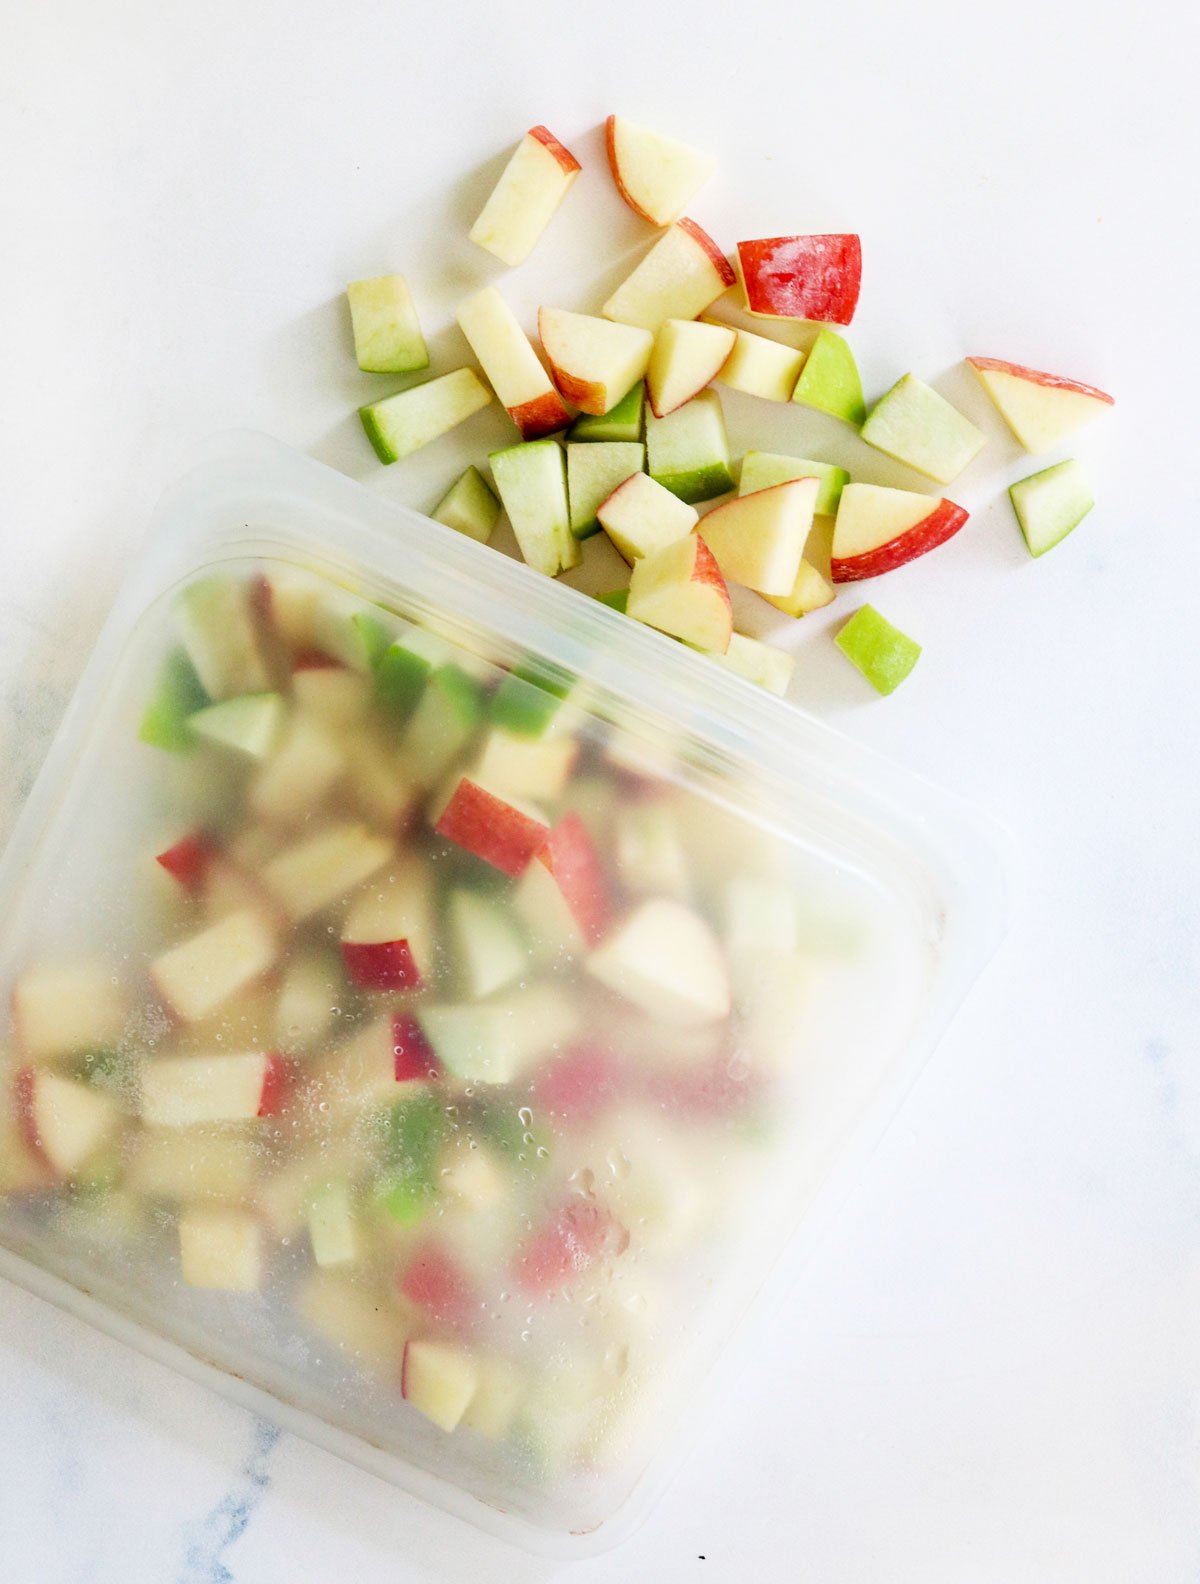 This Storage Method Will Keep Your Apple Slices From Browning